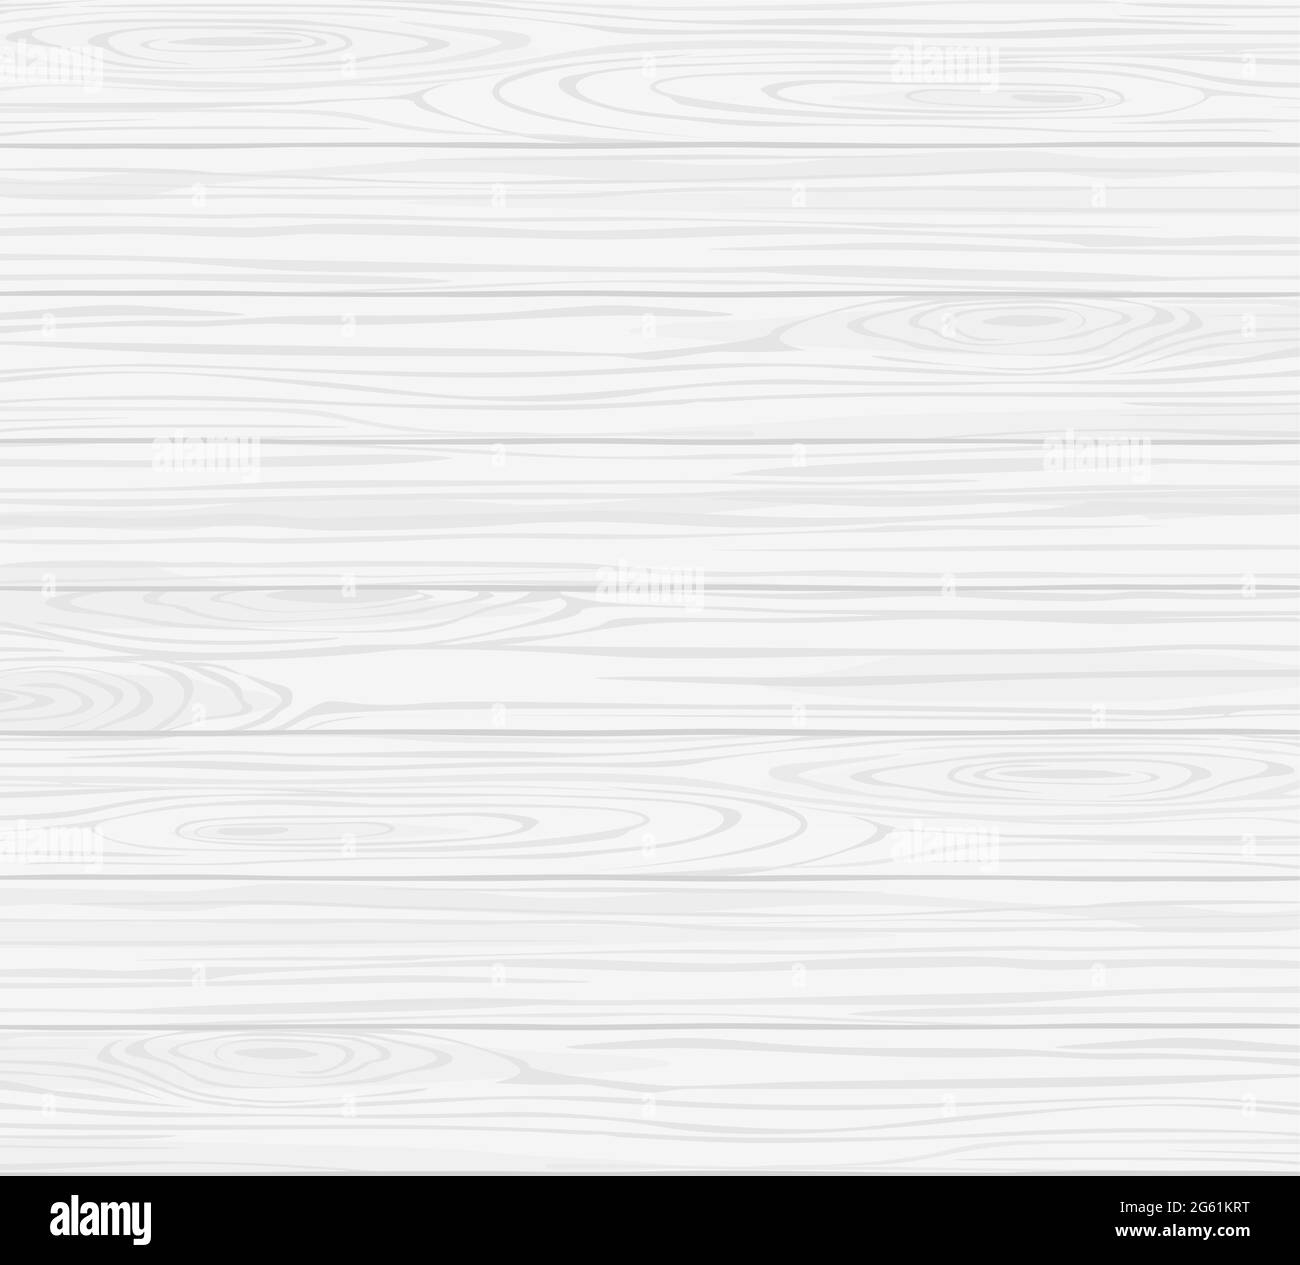 White wood texture vector illustration, wooden horizontal light plank pattern with grunge surface for floor parquet, modern textured rough wall Stock Vector